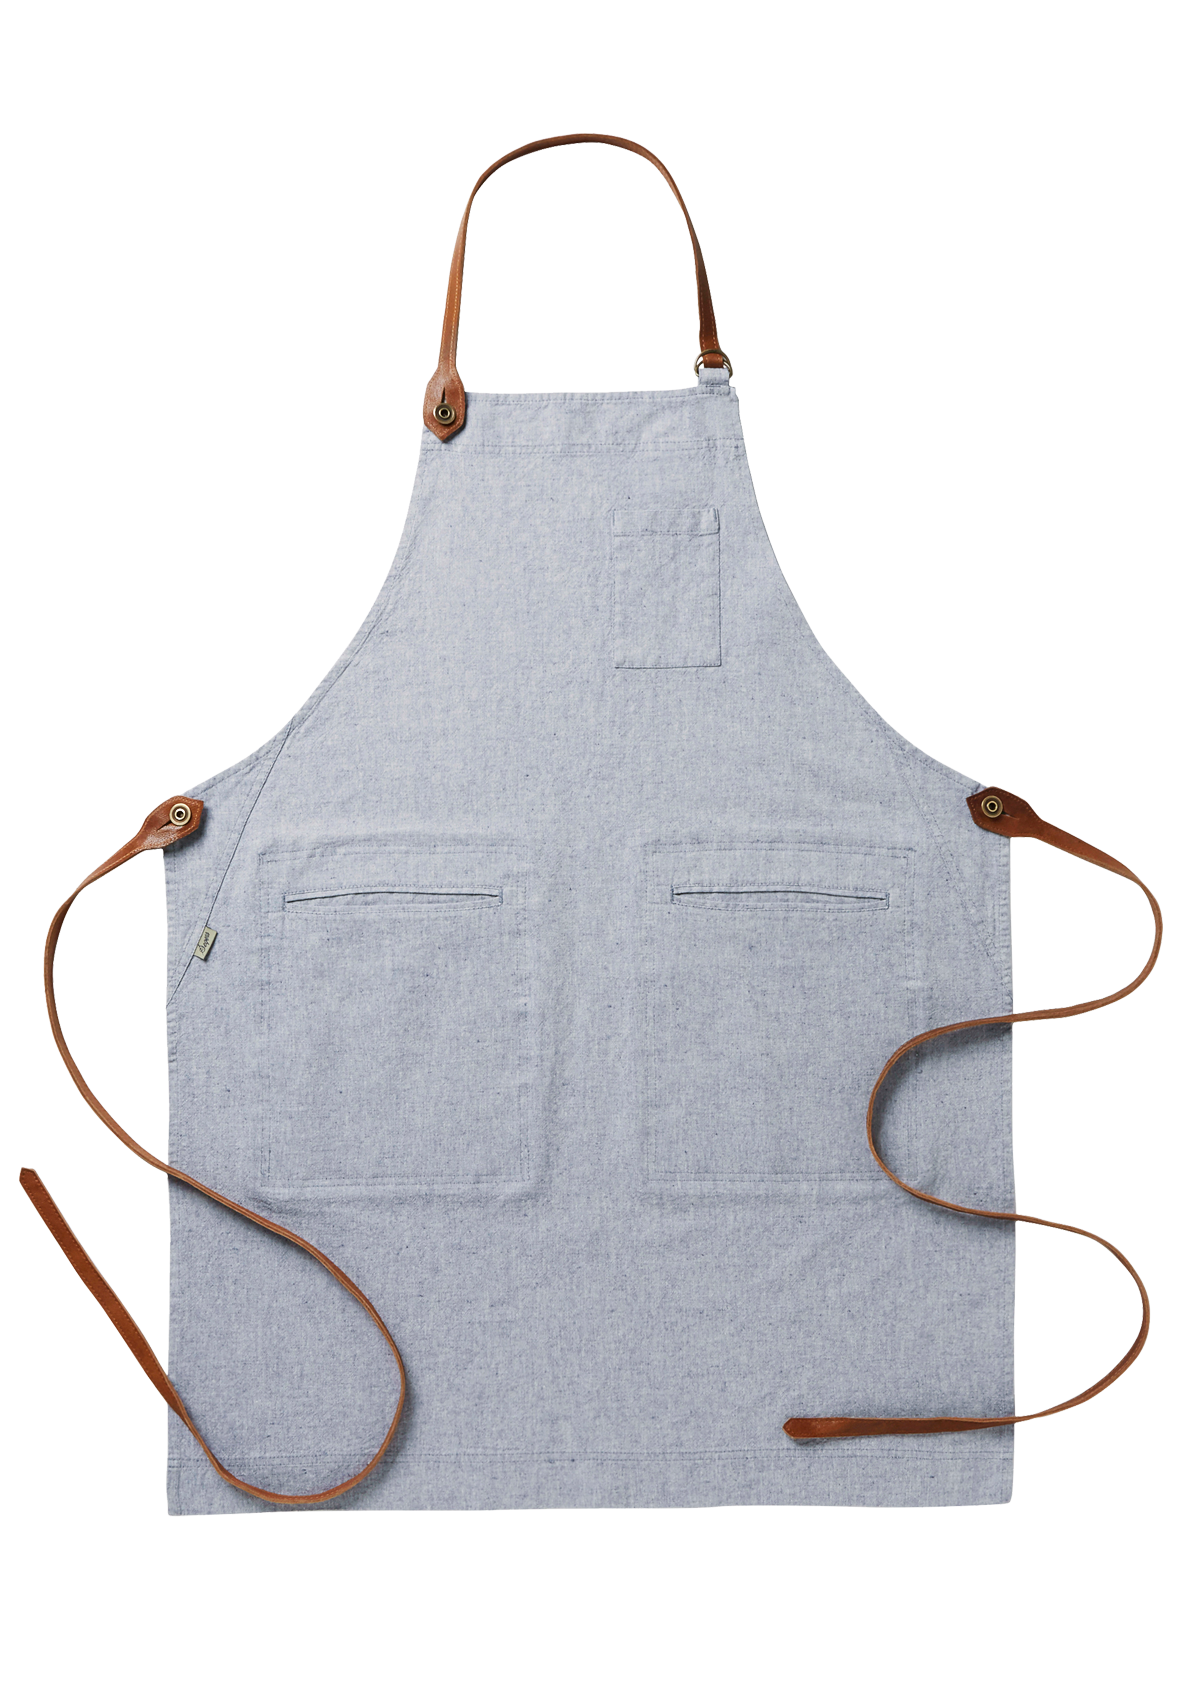 Bib Apron with Real Leather Details Unisex